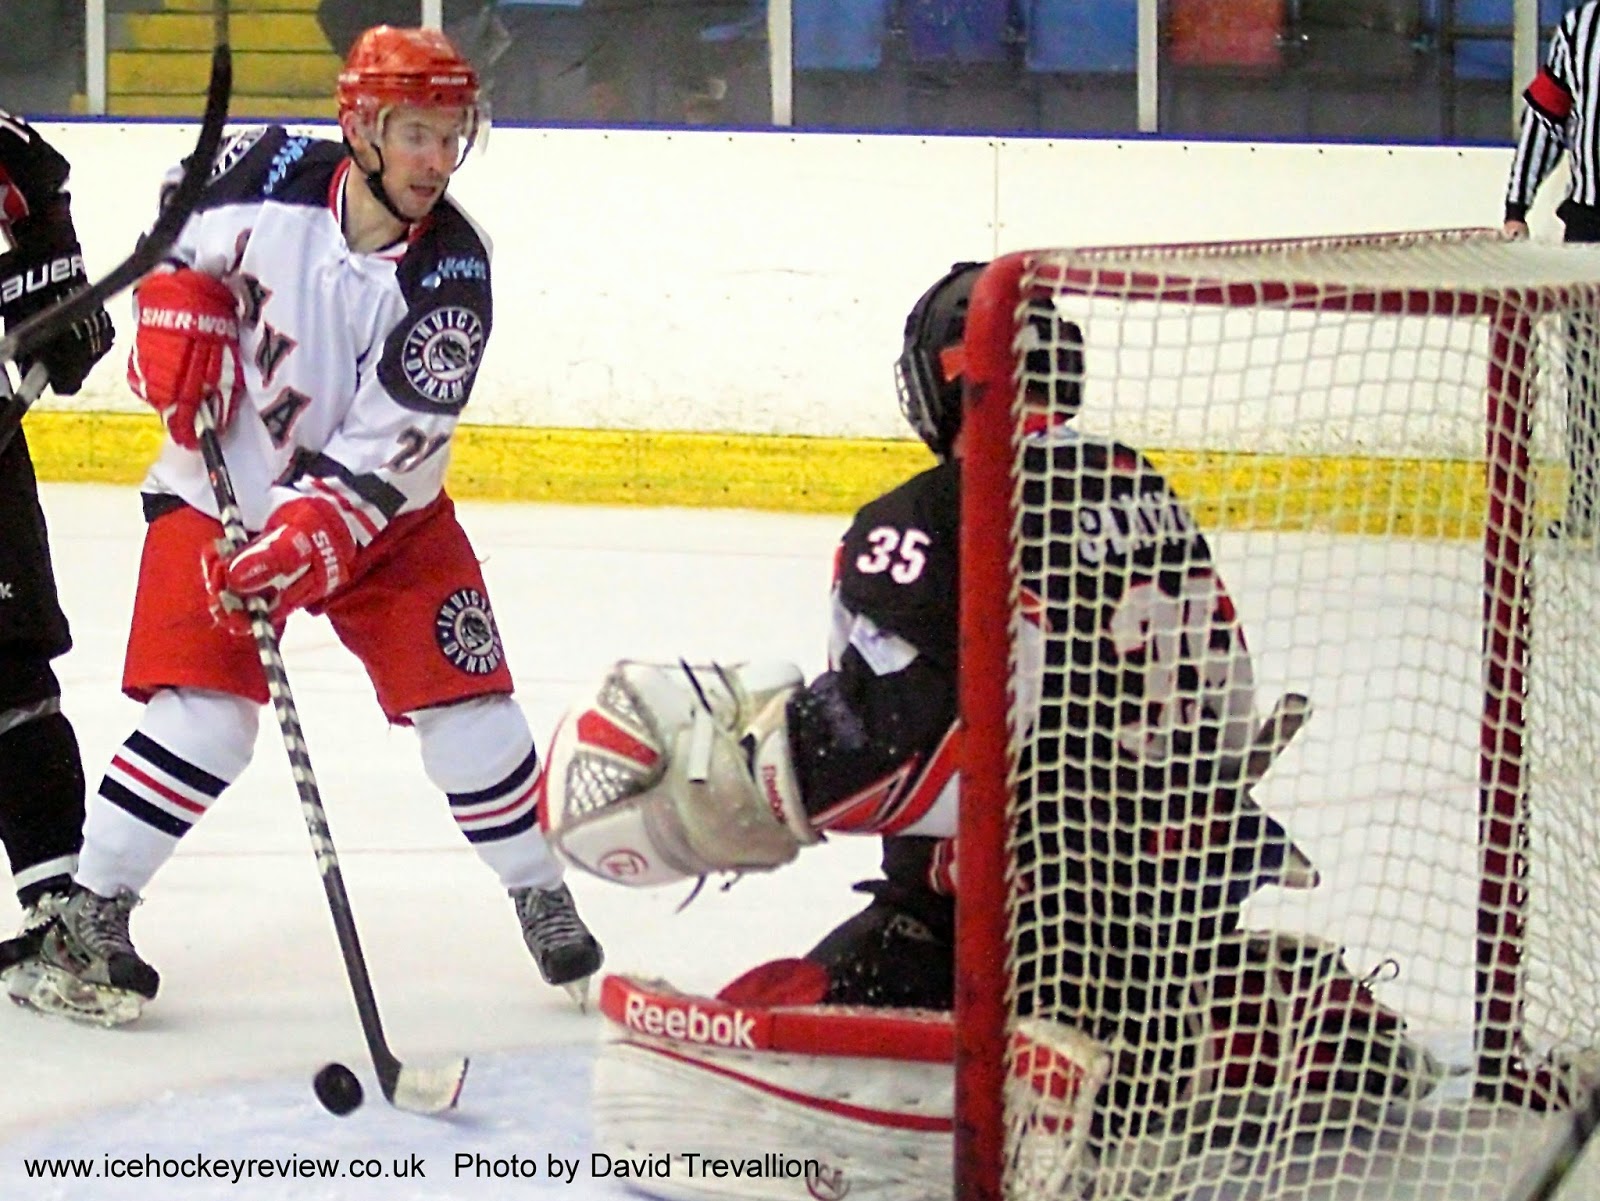 Devils fall to Chieftains in Gosport